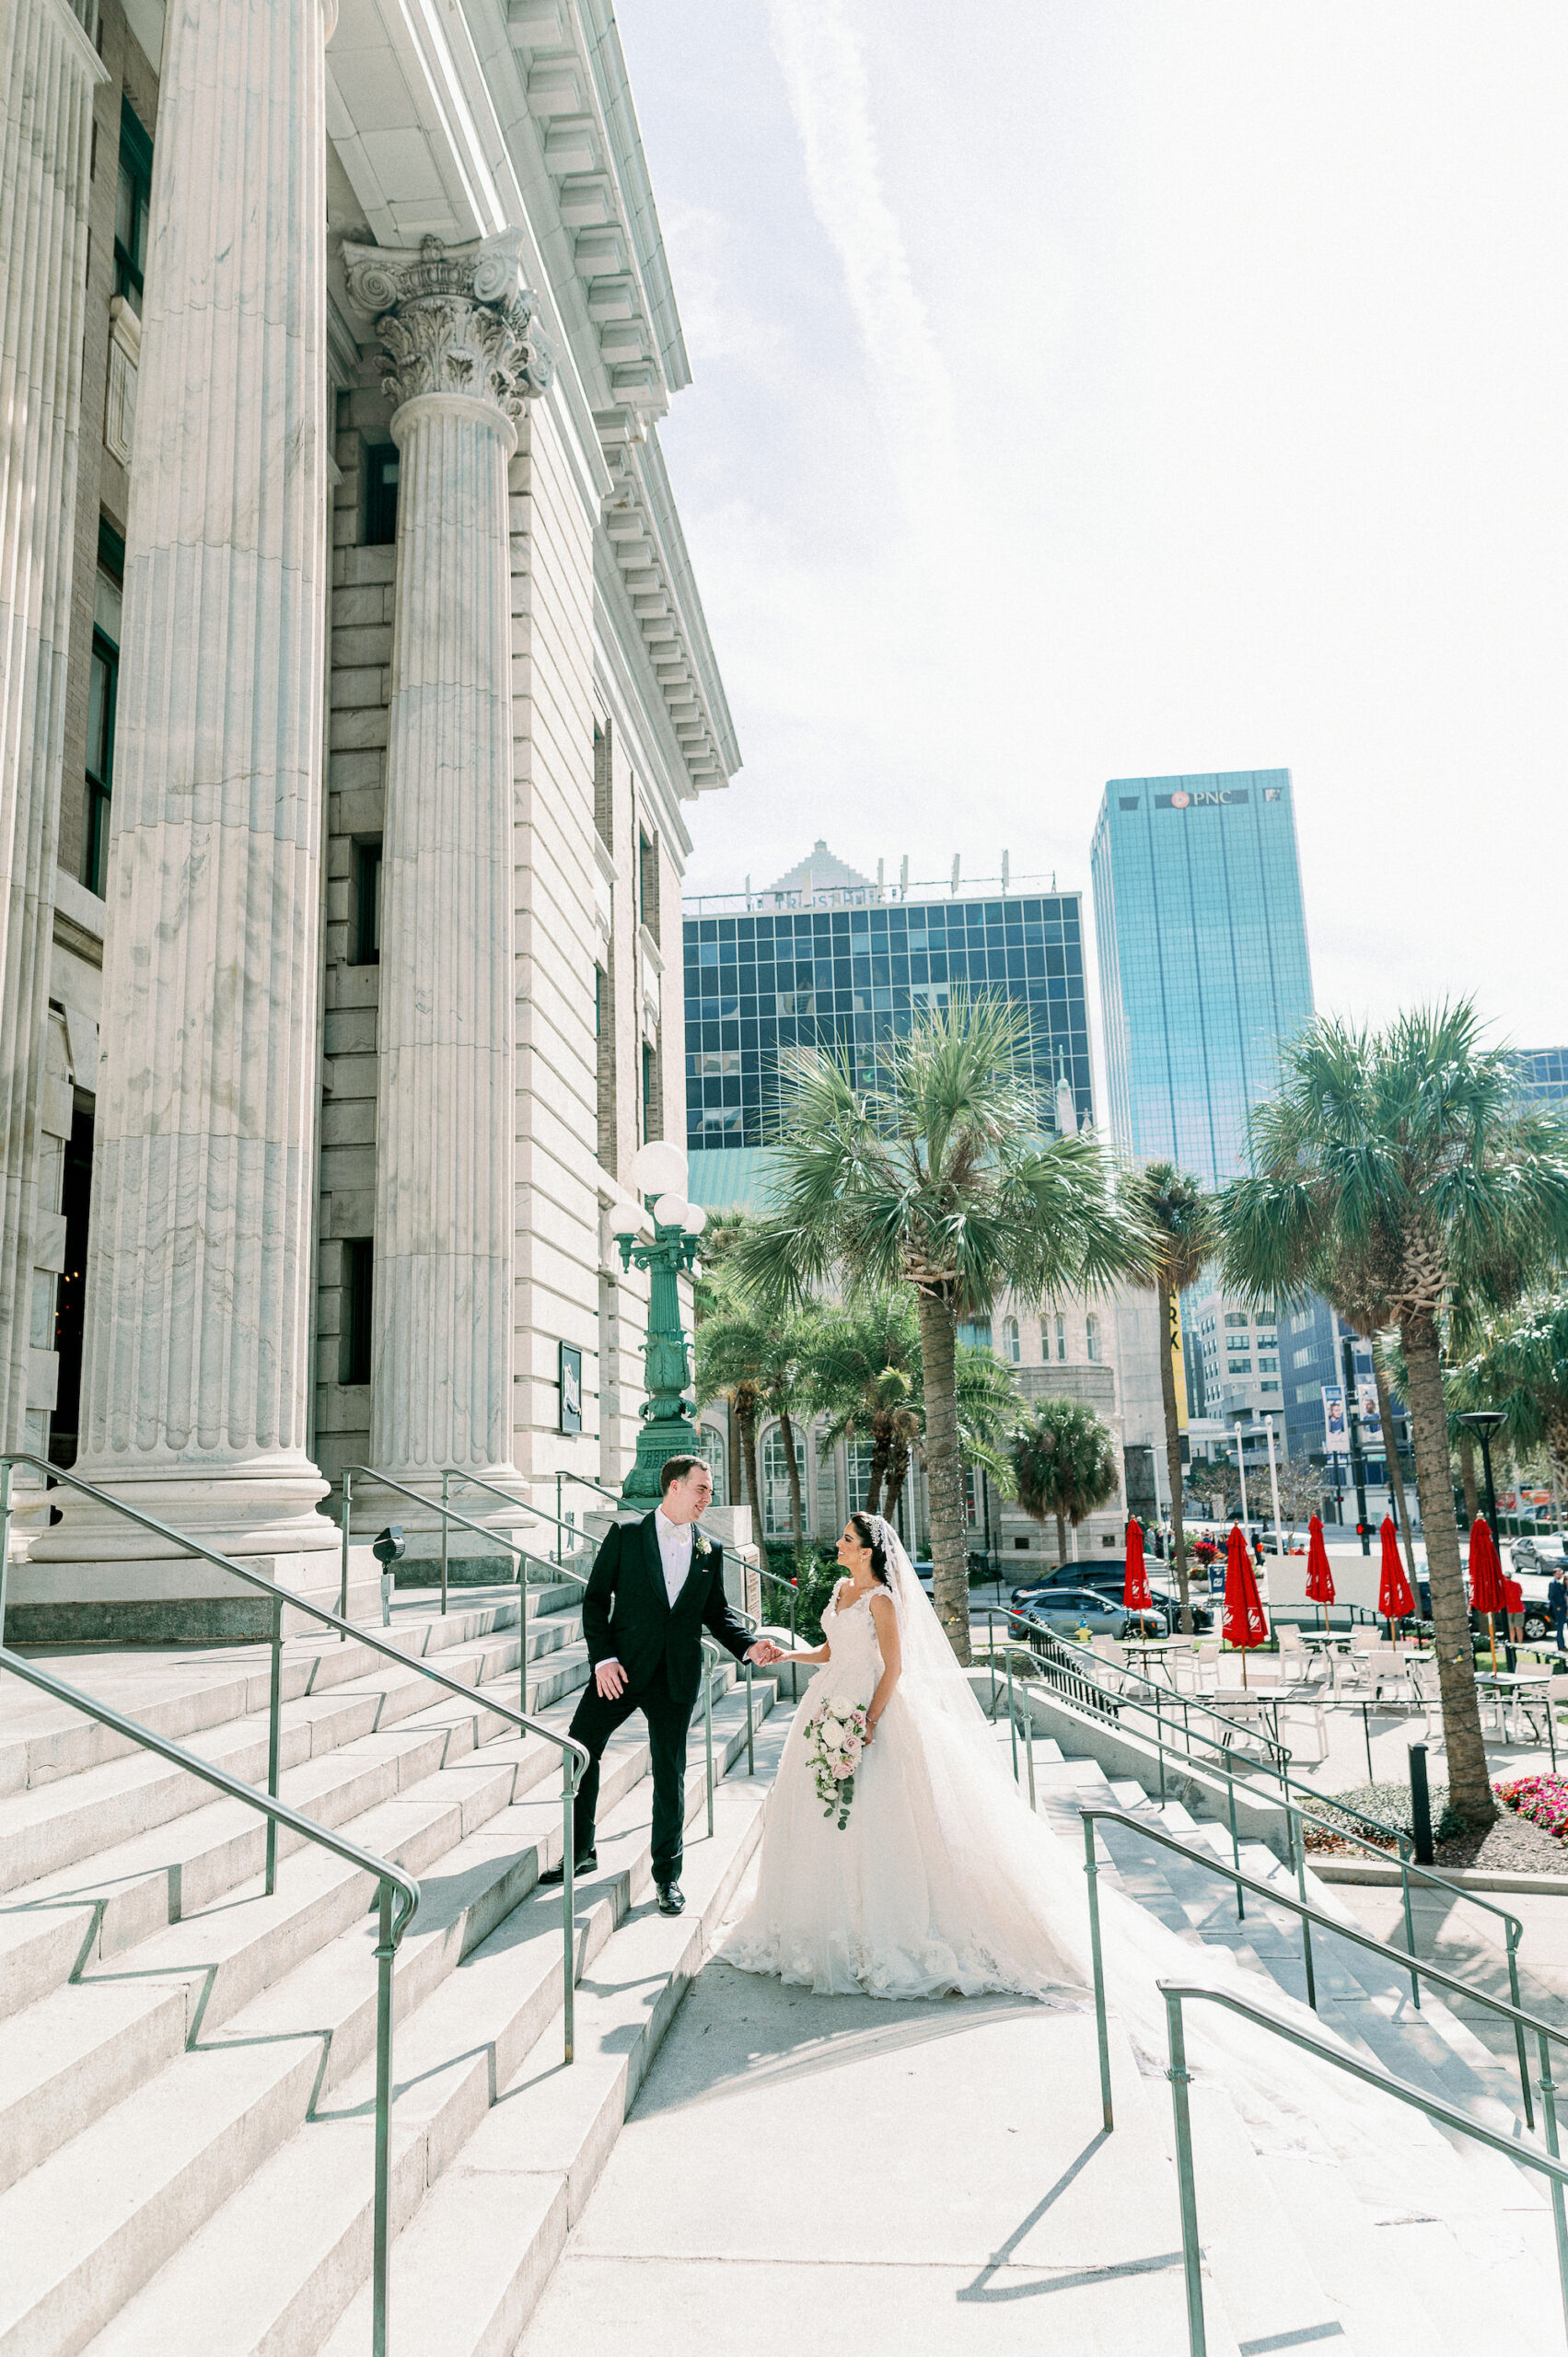 Bride and Groom First Look Wedding Portrait | Tampa Bay Wedding Photographer Dewitt for Love Photography